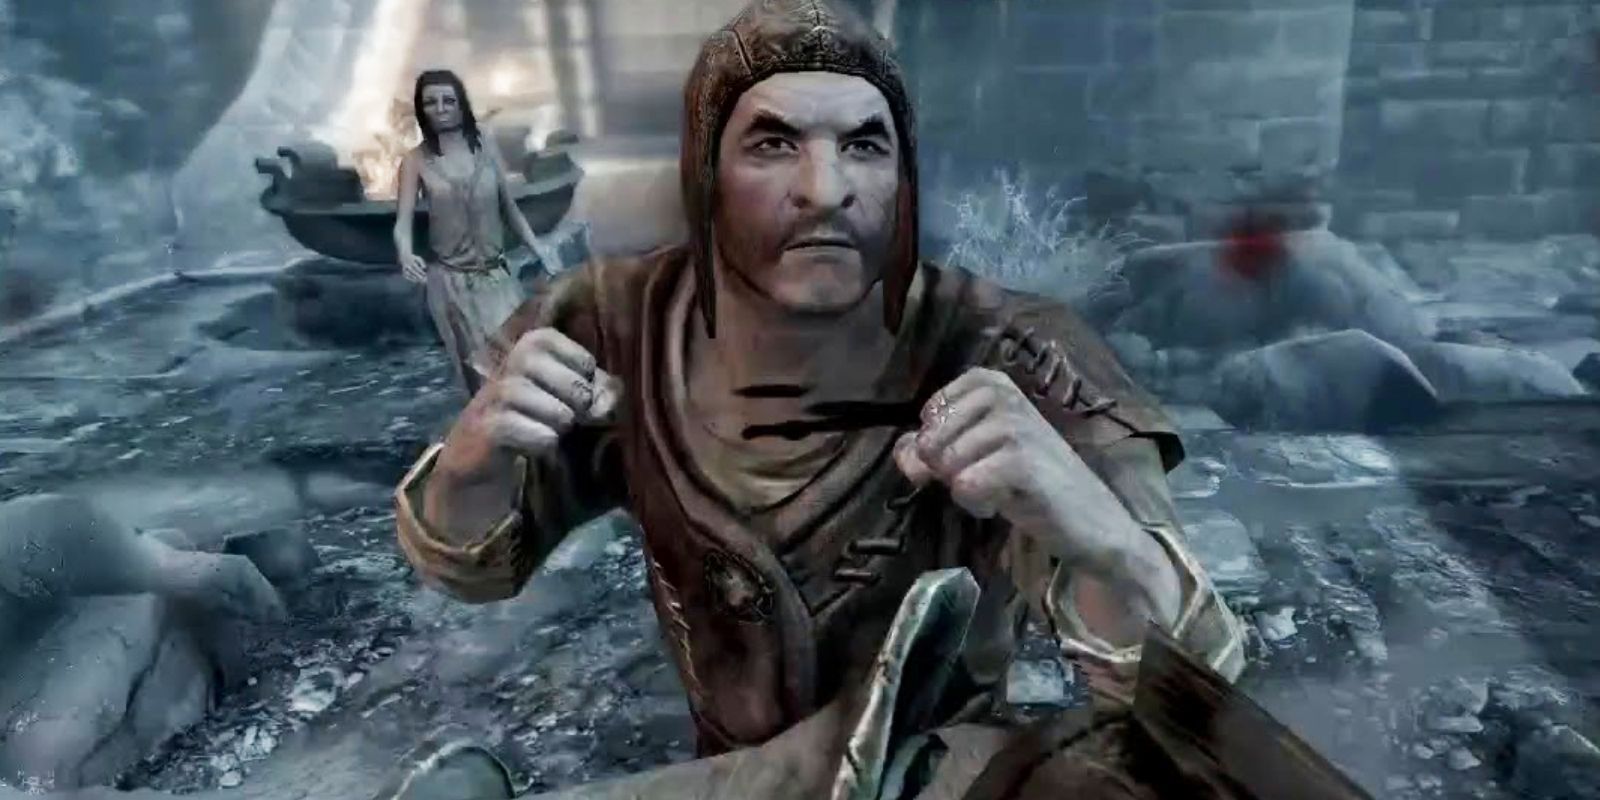 Skyrim Characters We Don't Want To See In TES 6 (Or Ever Again) Ulfric Stormcloak Civil War